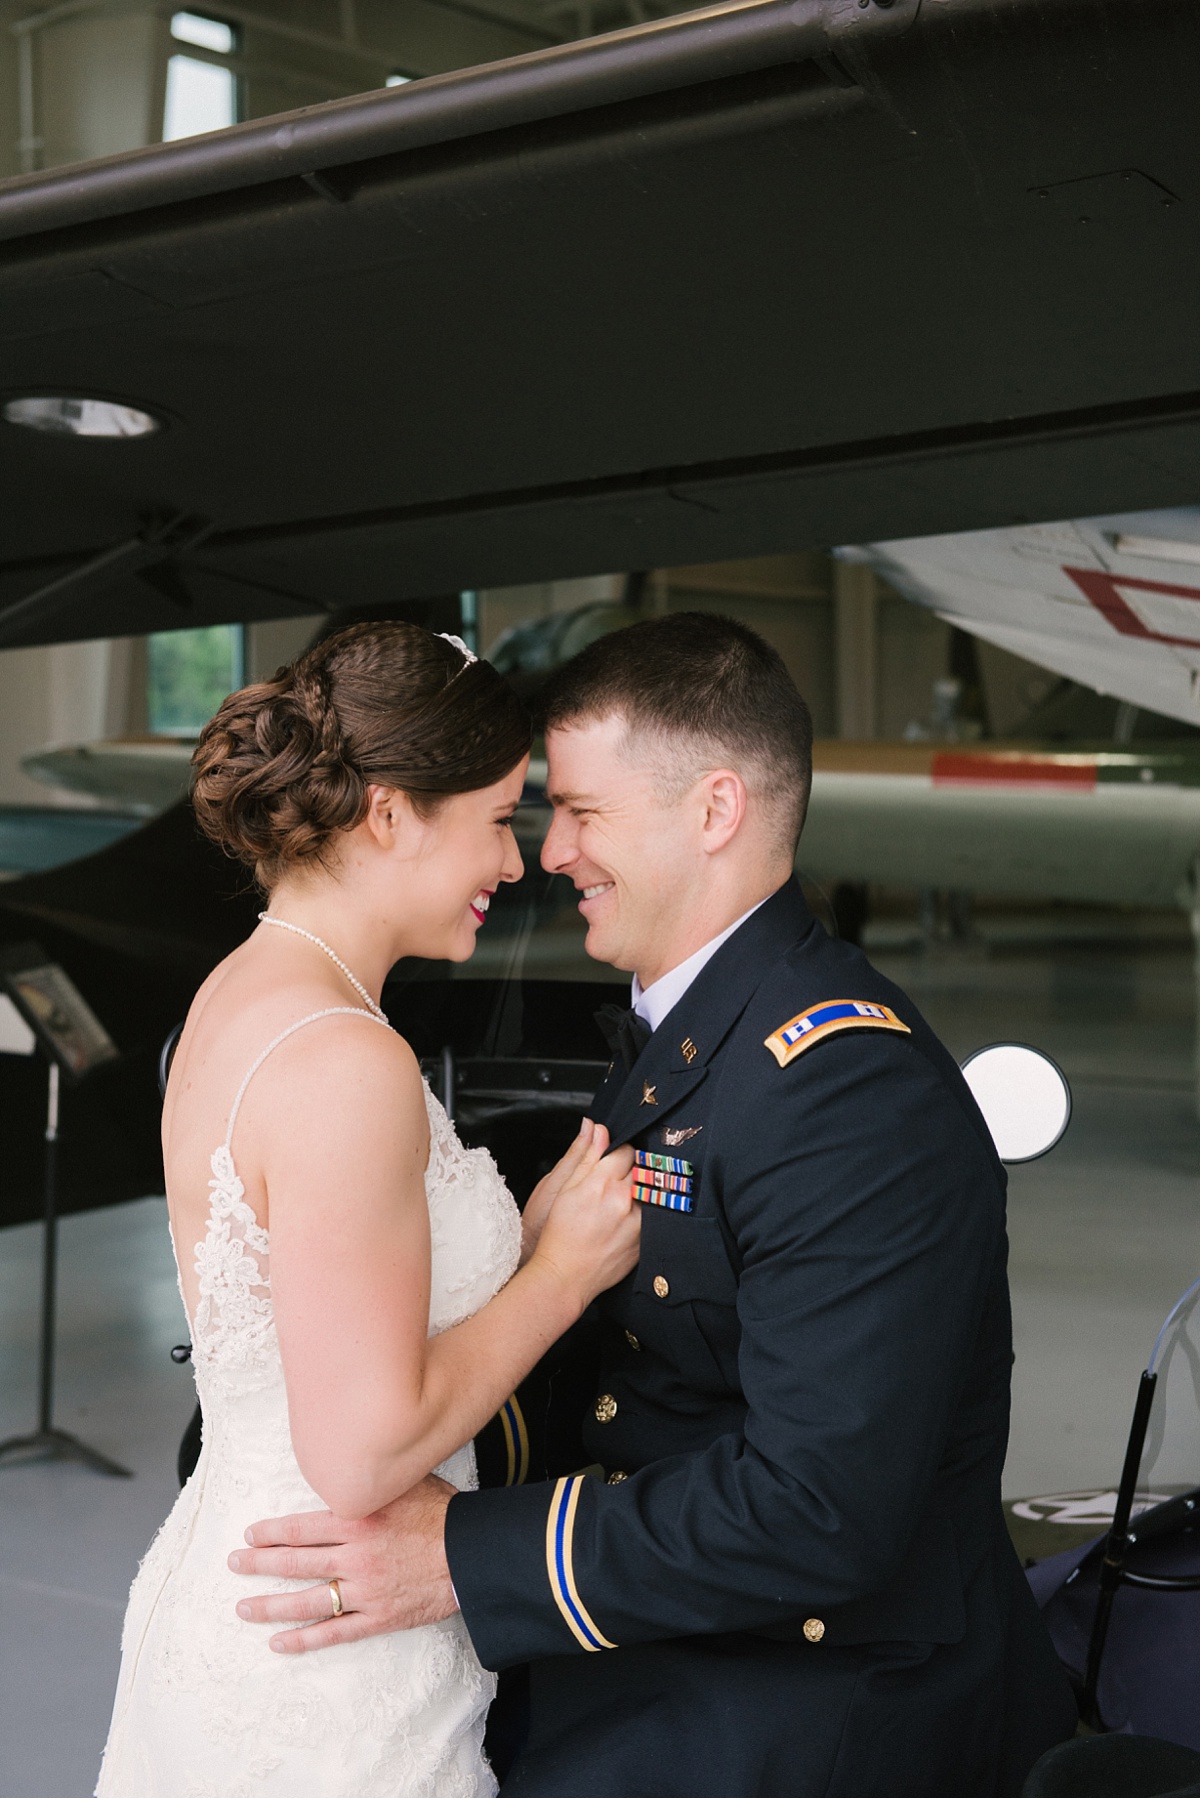 Aviation wedding photographer based out of Newport News Virginia